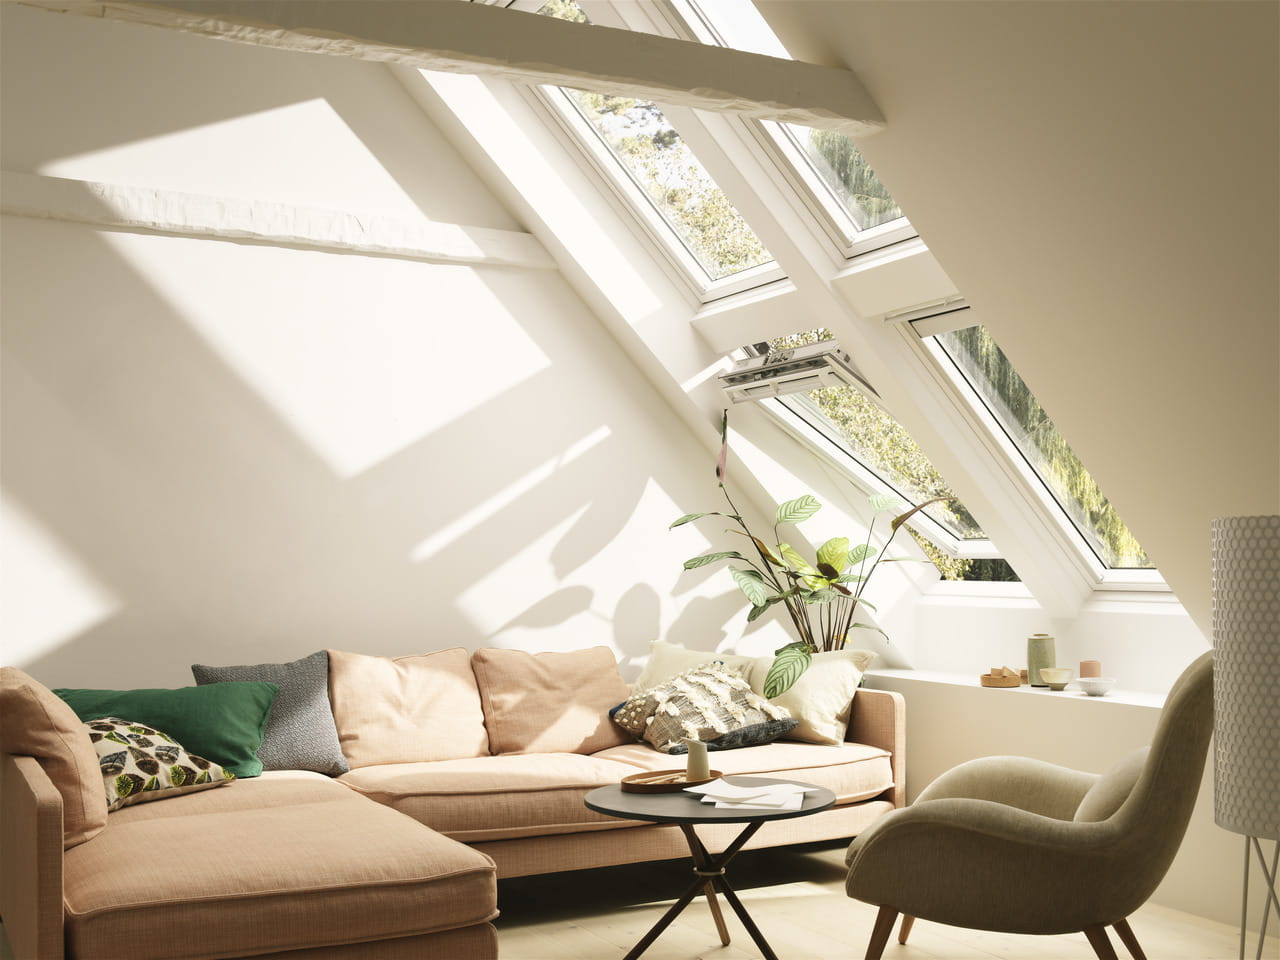 Bright and cozy living room area with roof windows.